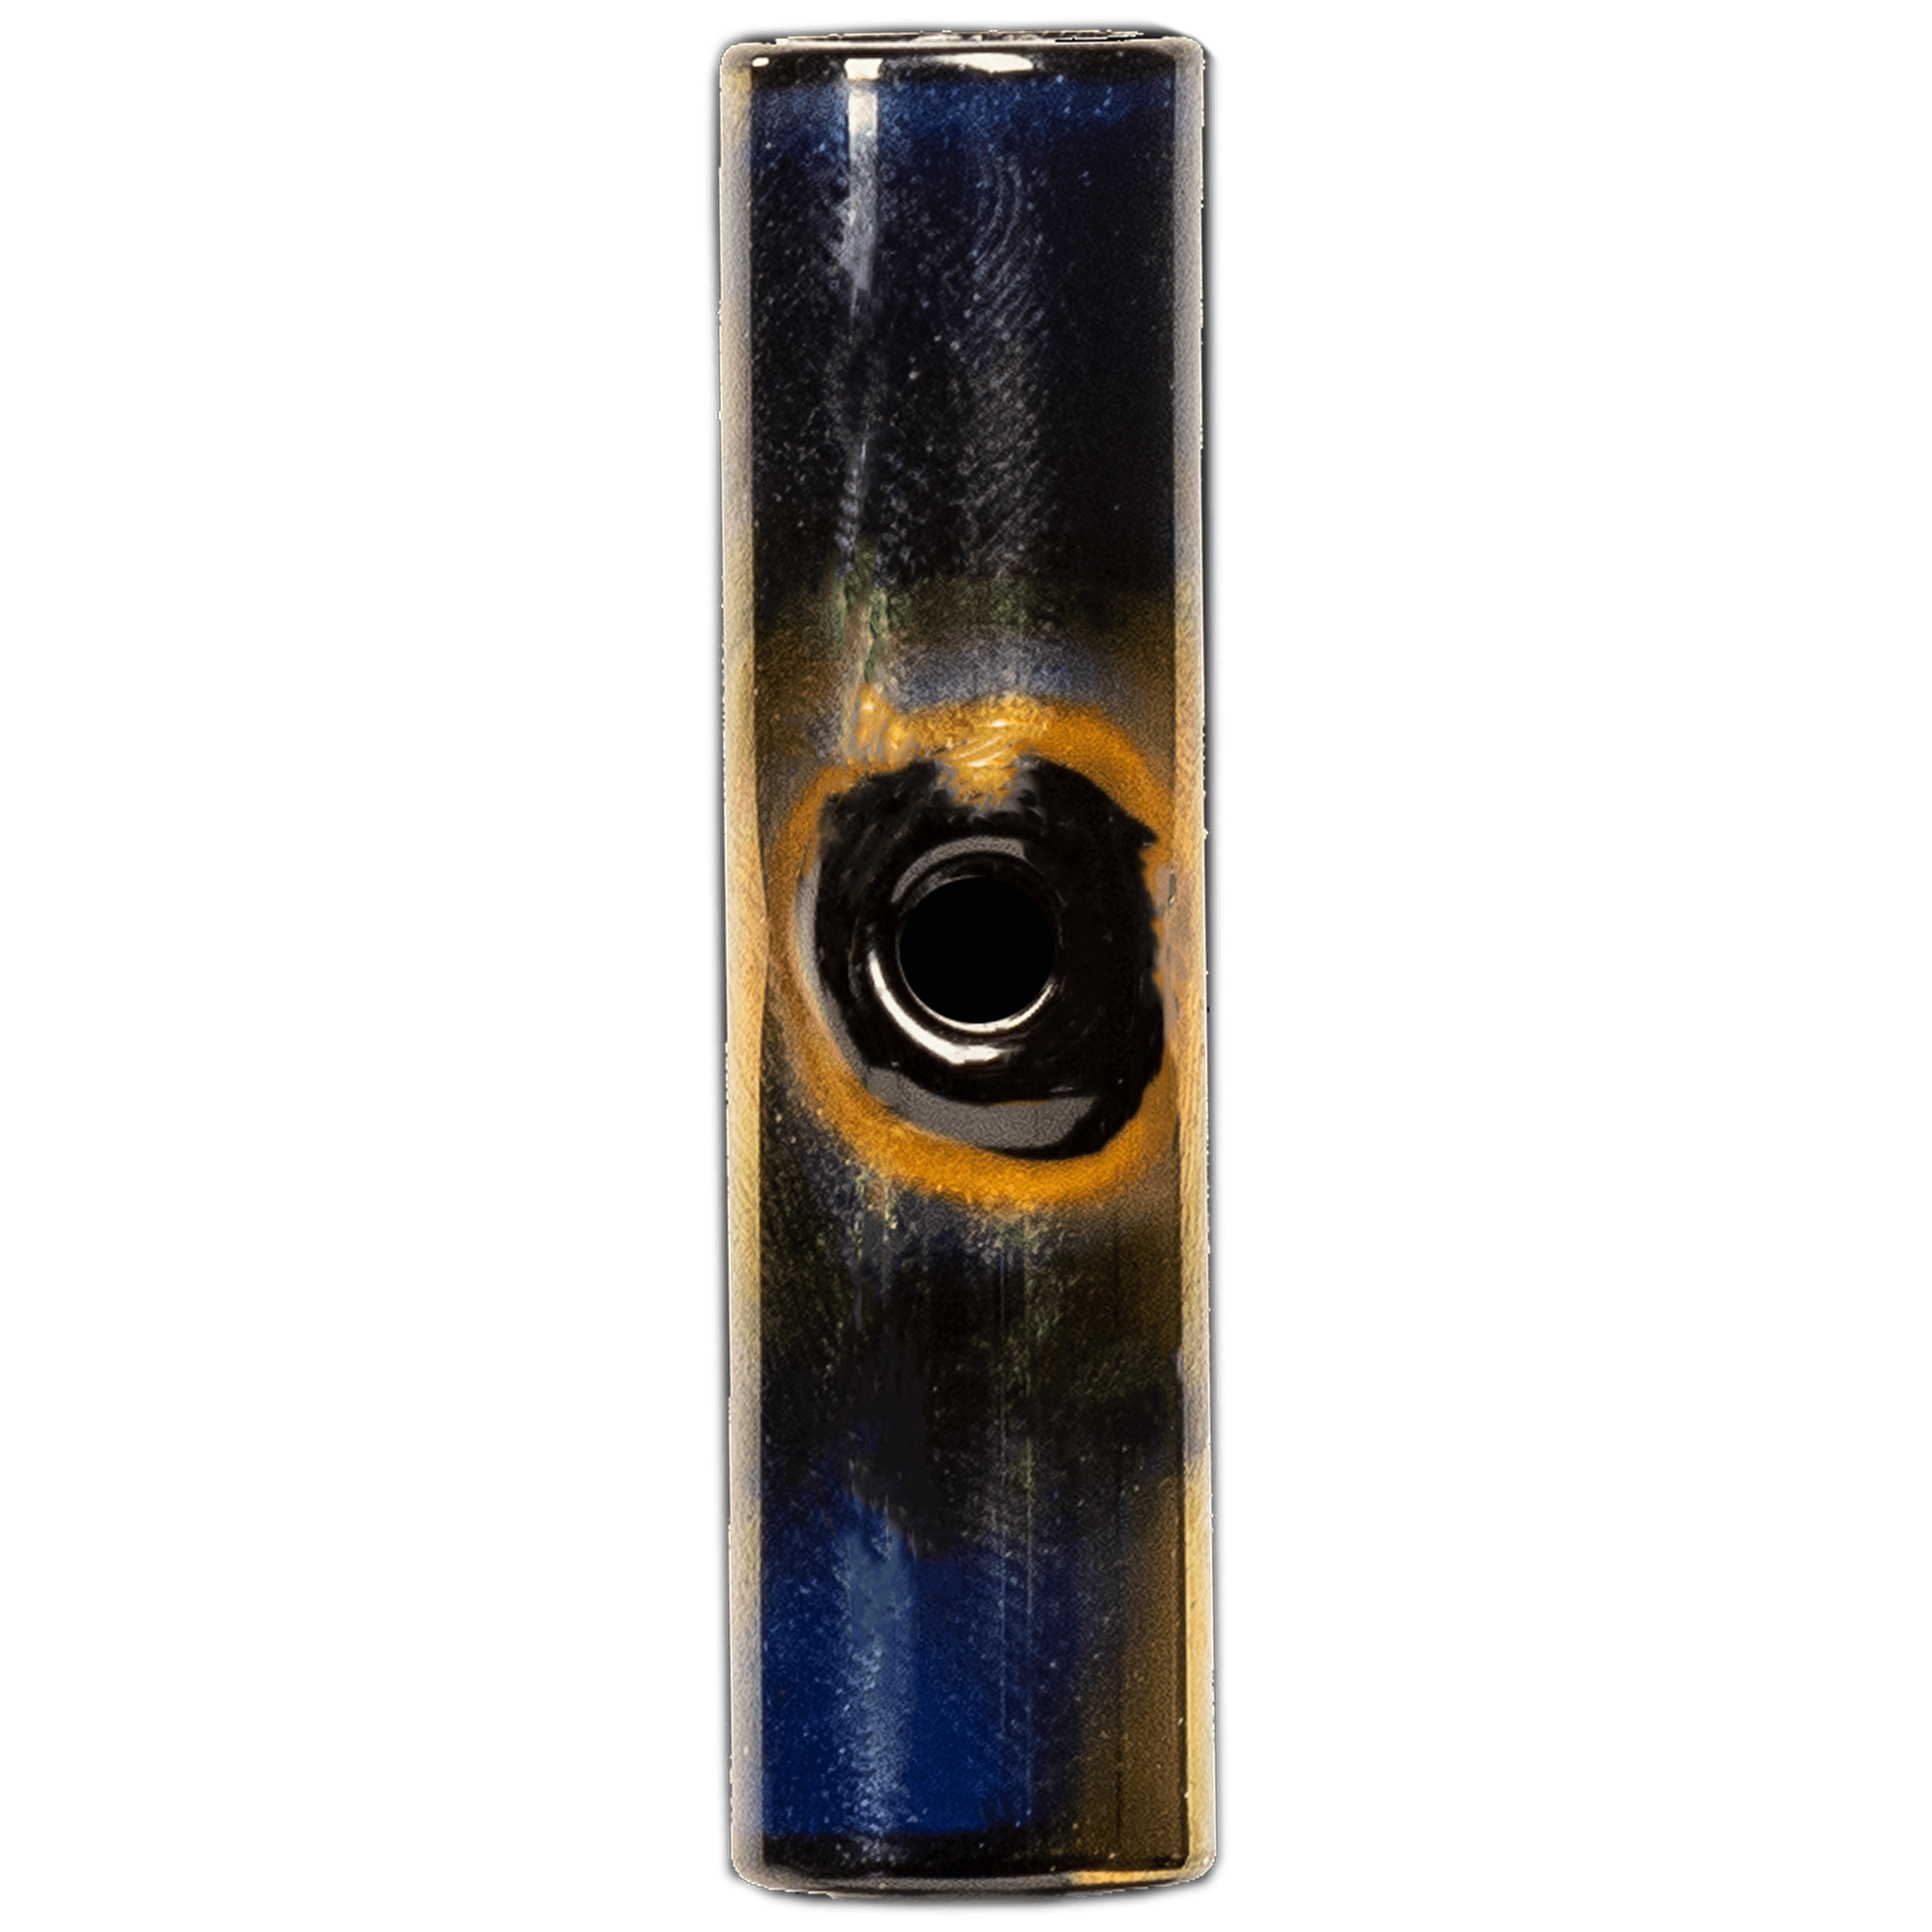 galaxy glass vaporizer body in gold front view